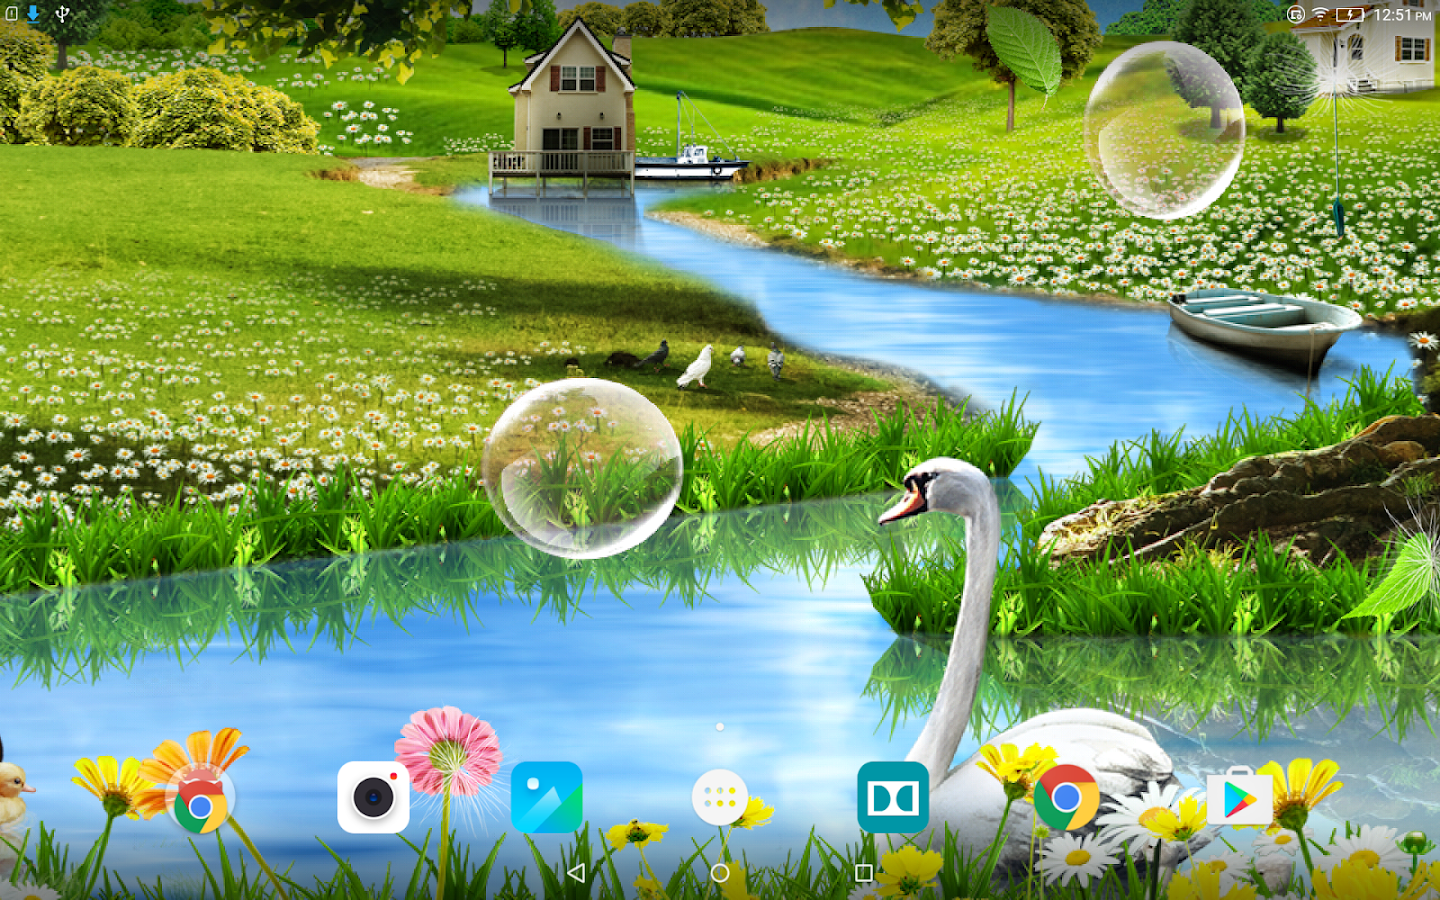 animated live wallpaper,natural landscape,nature,water resources,water,vegetation